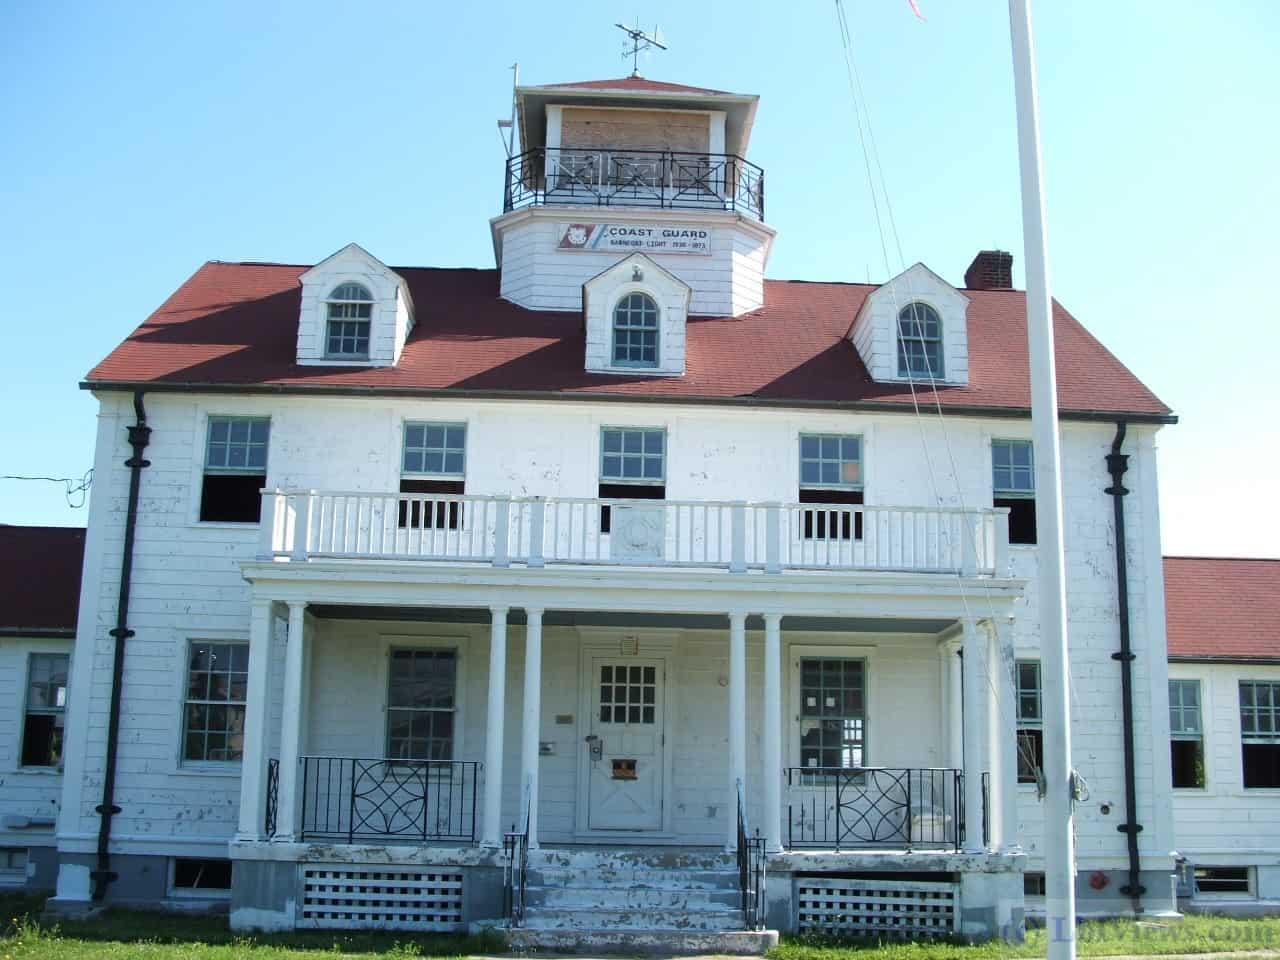 The old Coast Guard Station in Barnegat LIght Circa 2005